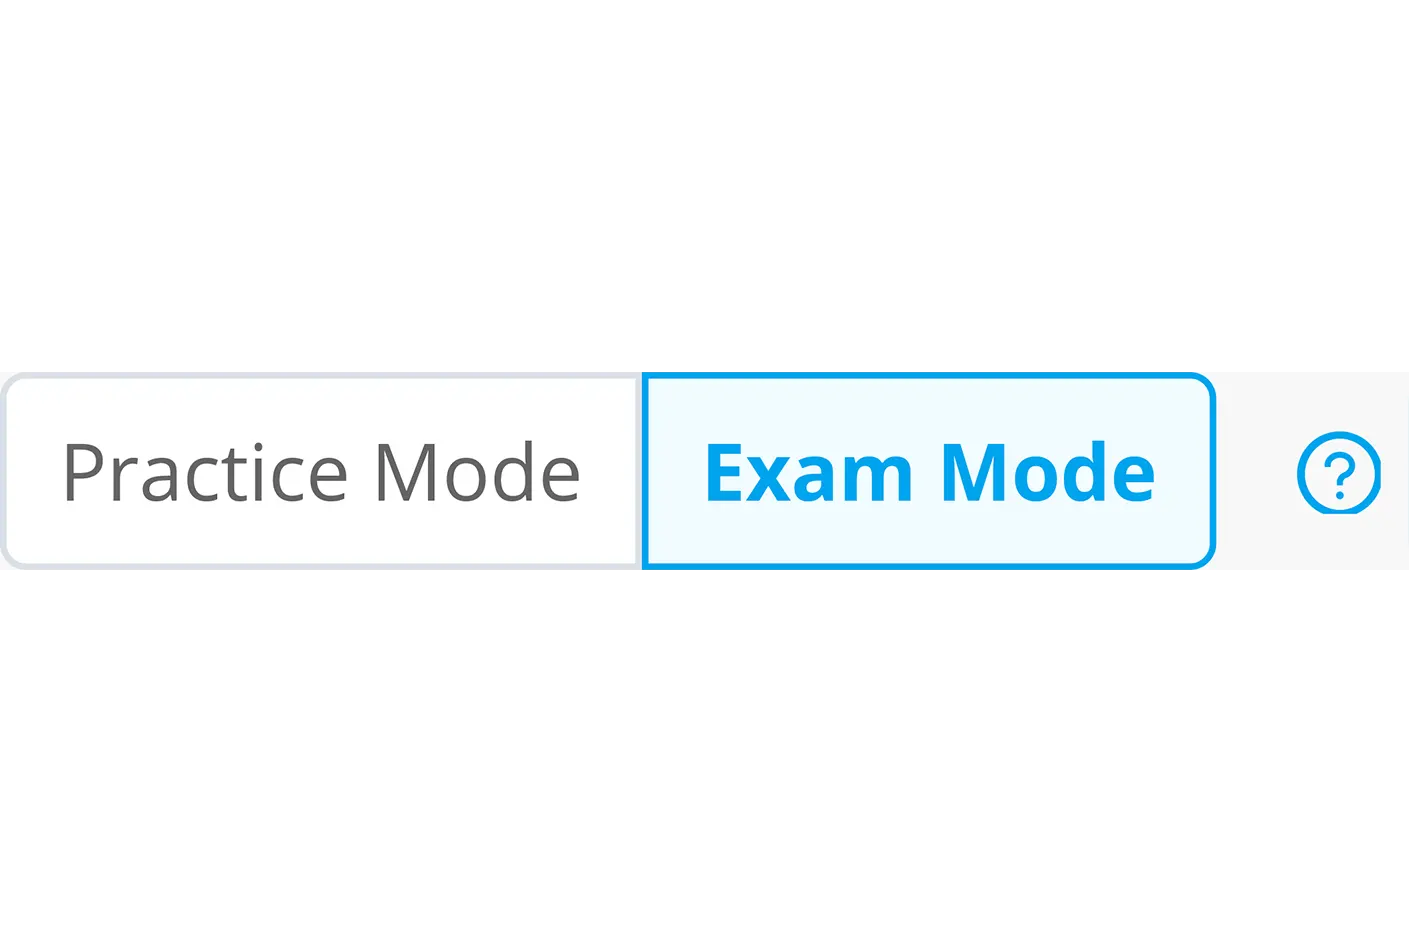 There is a screenshot of exam mode select for University practice test